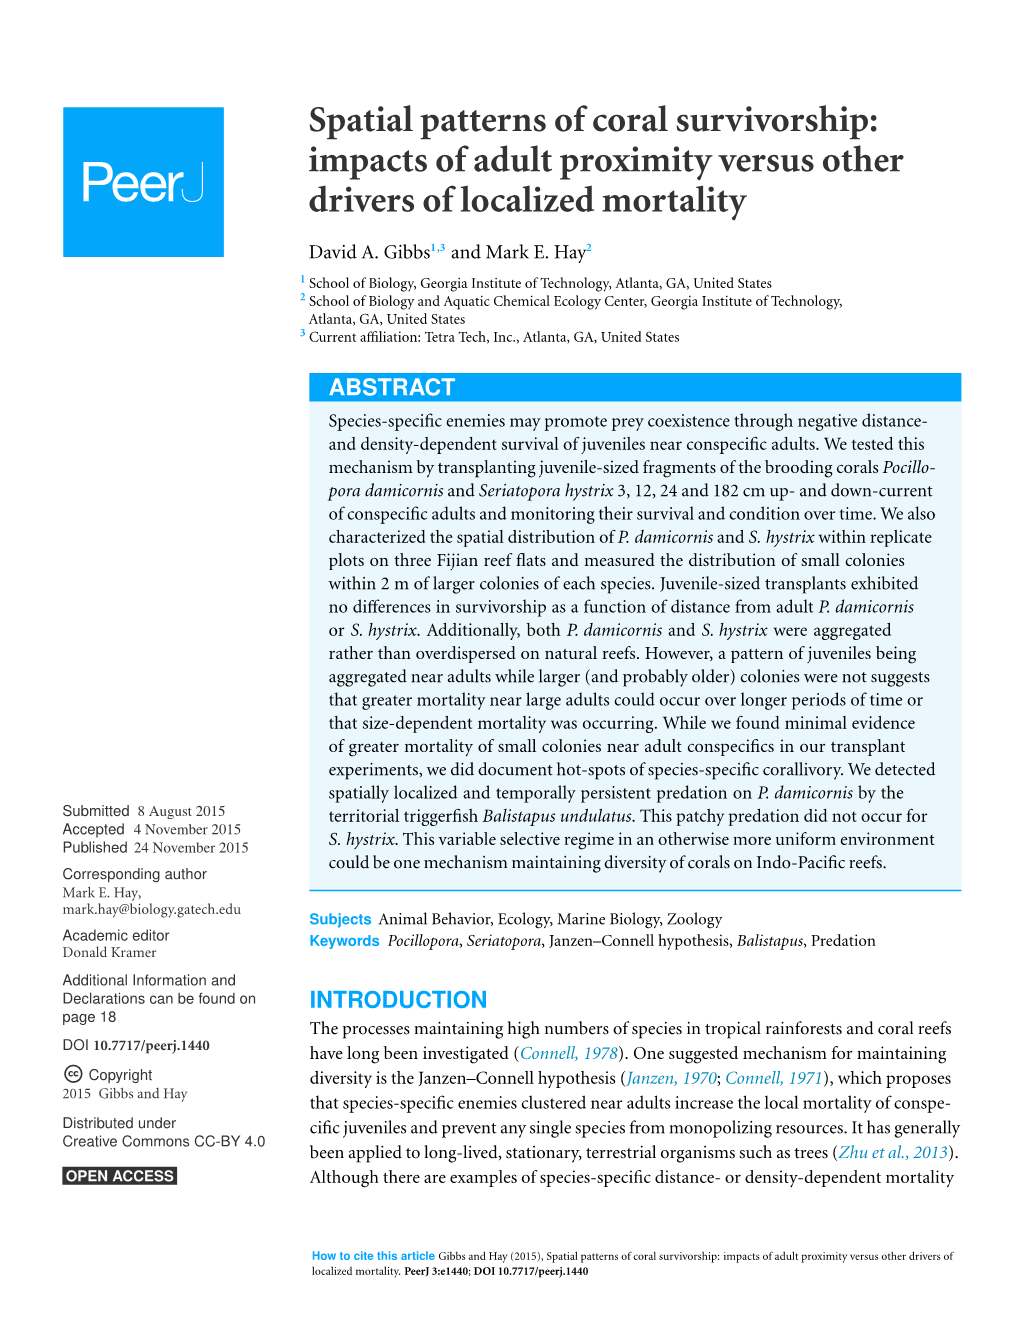 Spatial Patterns of Coral Survivorship: Impacts of Adult Proximity Versus Other Drivers of Localized Mortality